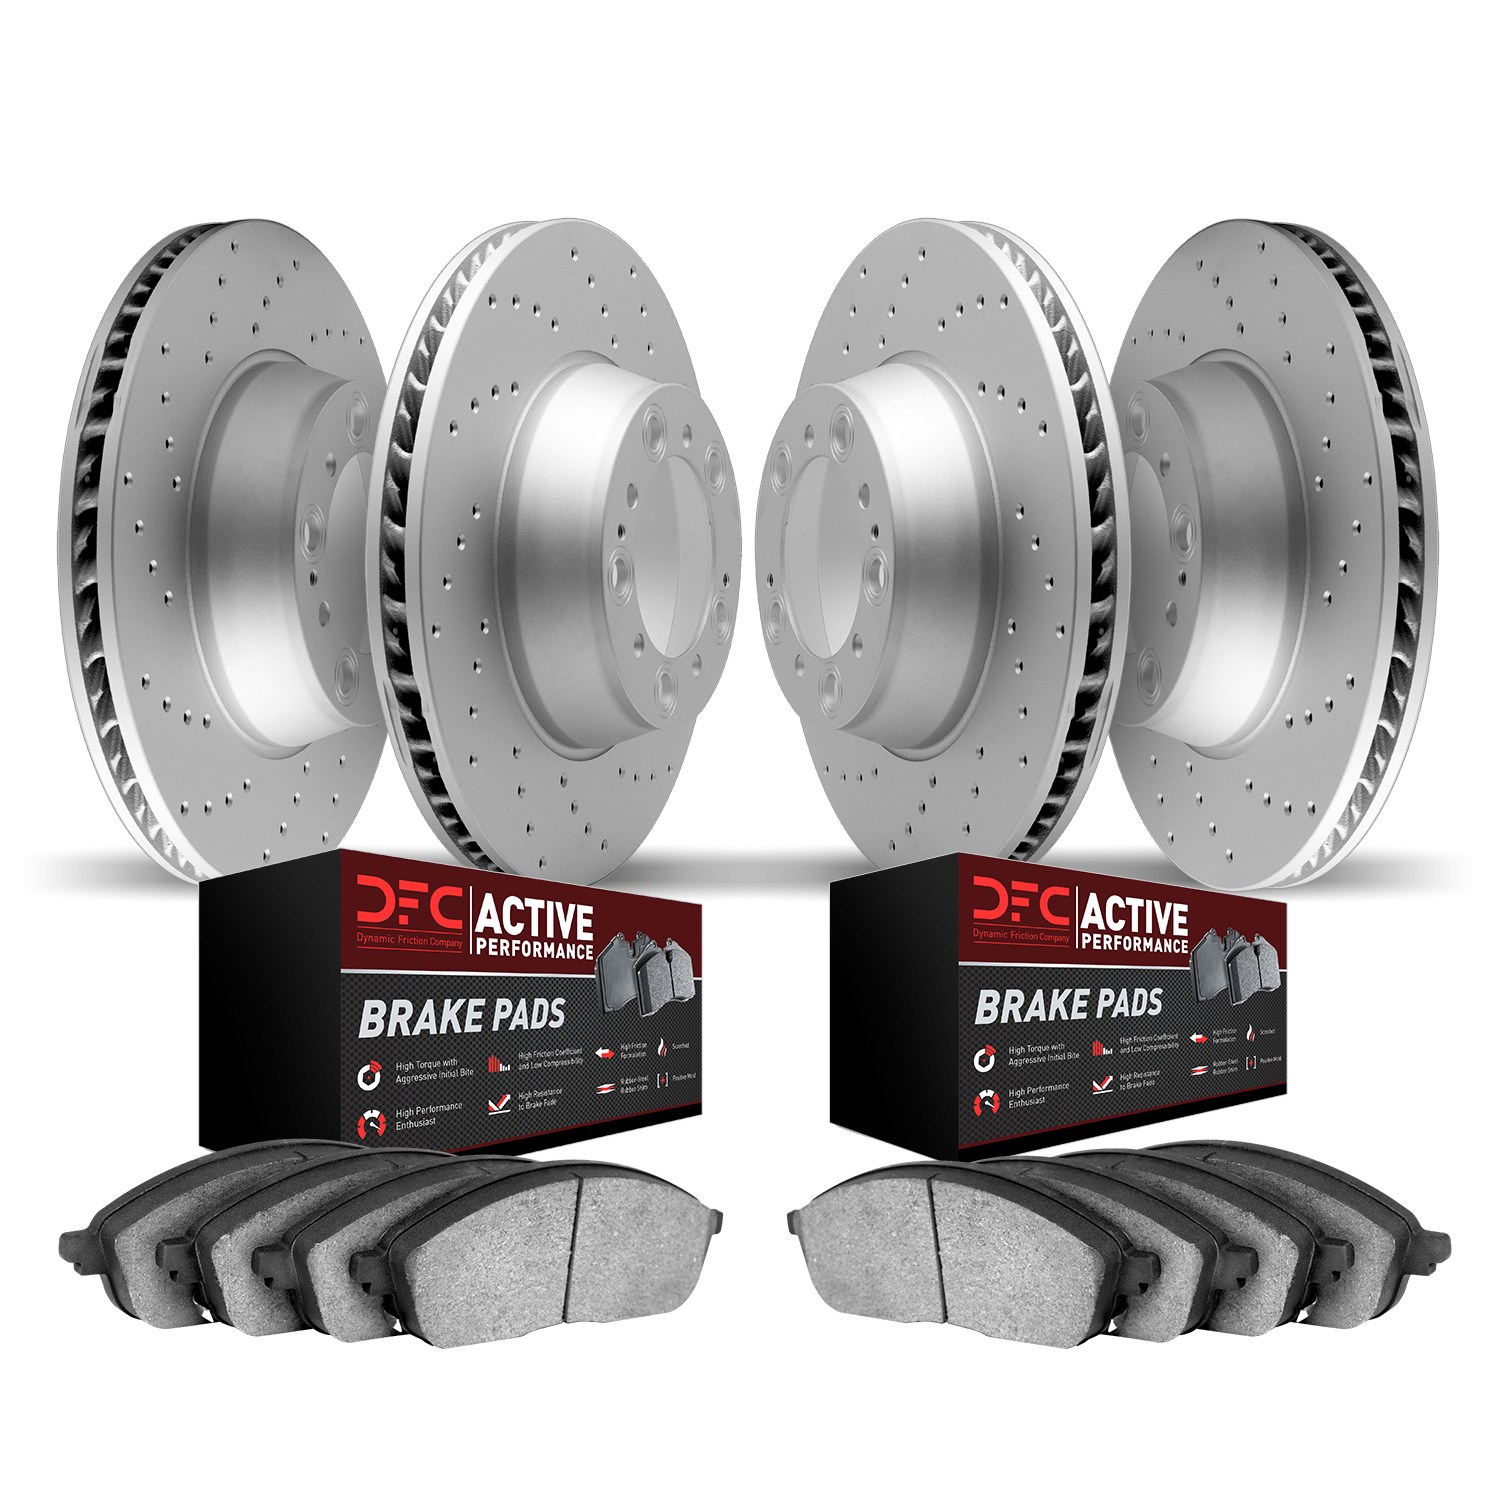 2704-74028 Geoperformance Drilled Brake Rotors with Active Performance Pads Kit, 2008-2009 Audi/Volkswagen, Position: Front and